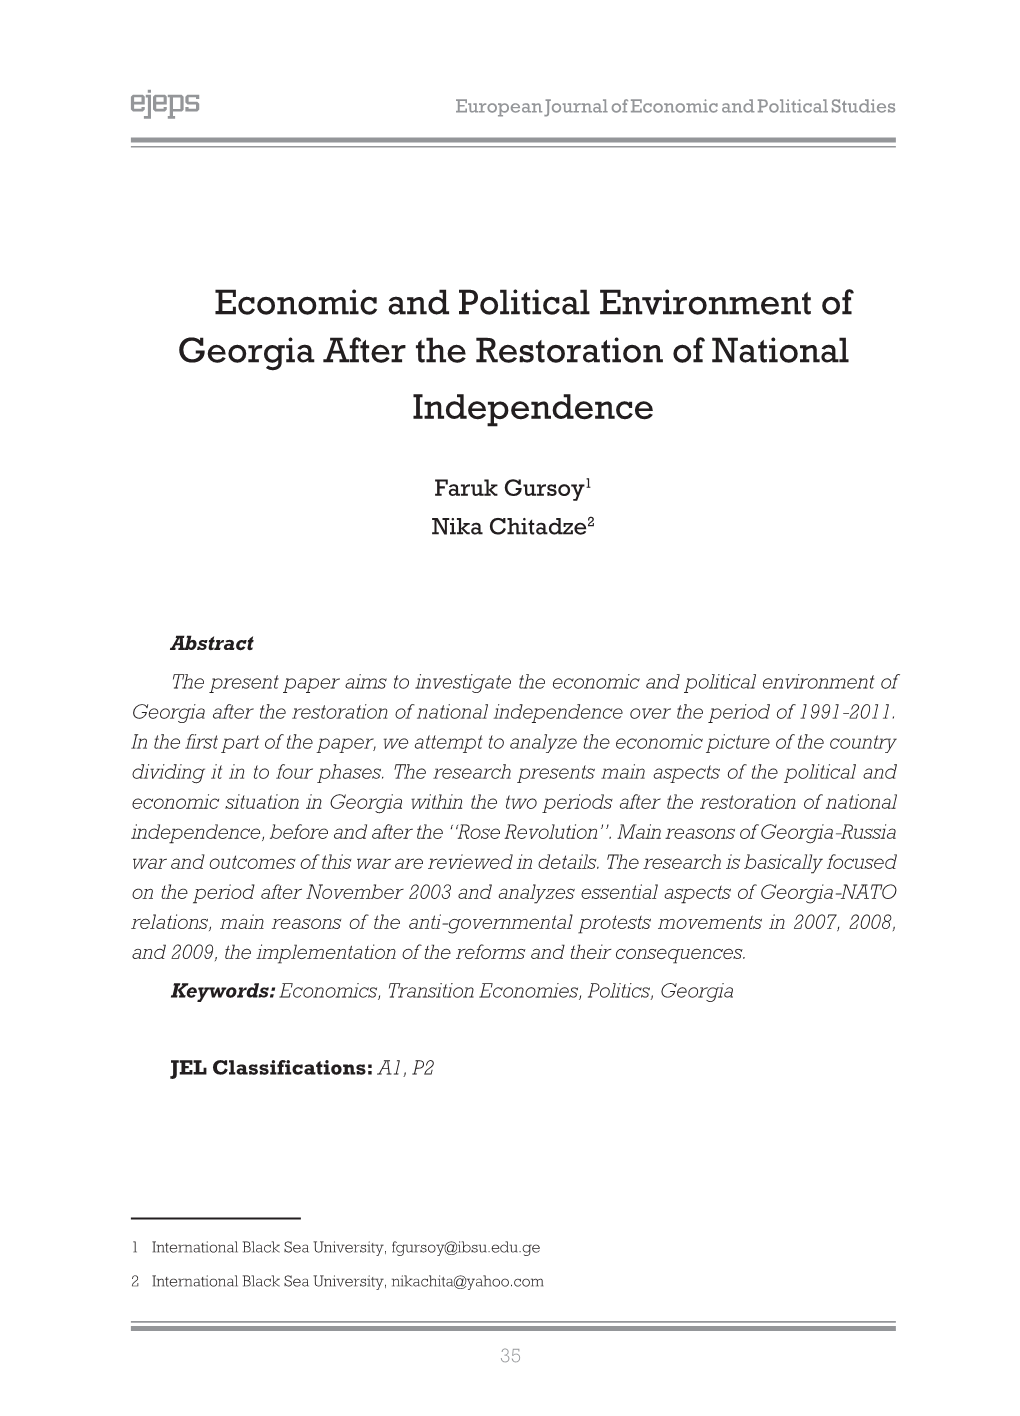 Economic and Political Environment of Georgia After the Restoration of National Independence